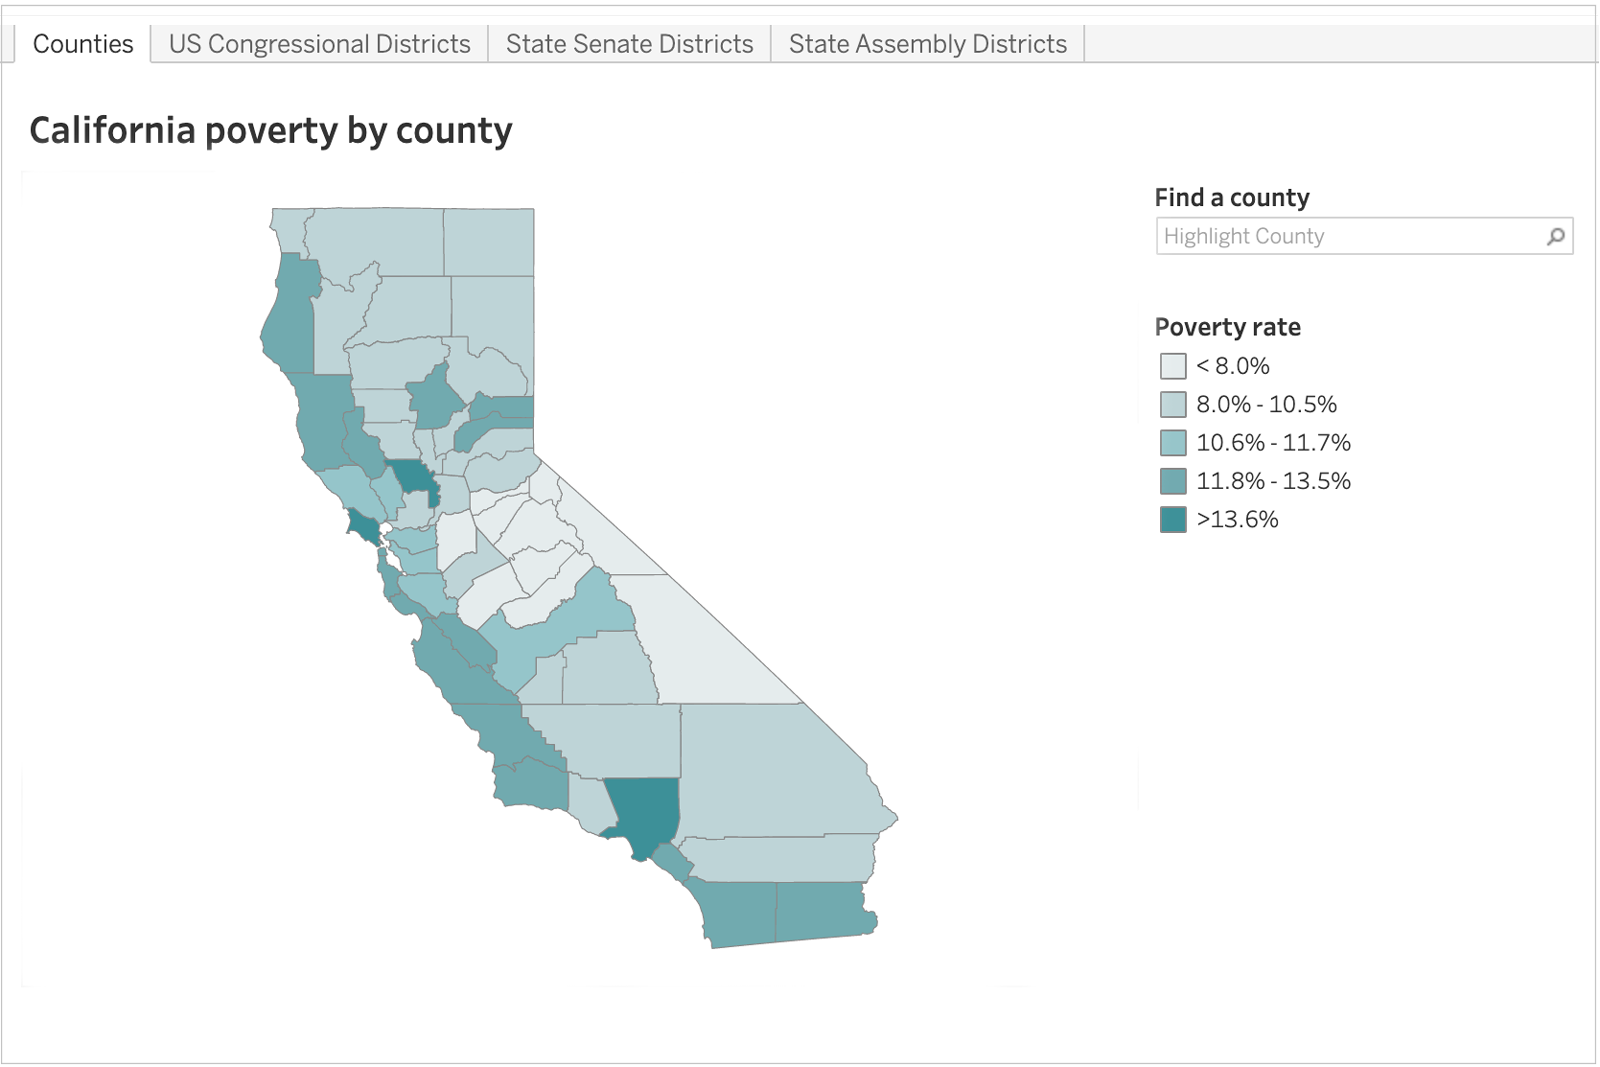 California Poverty by County and Legislative District Public Policy